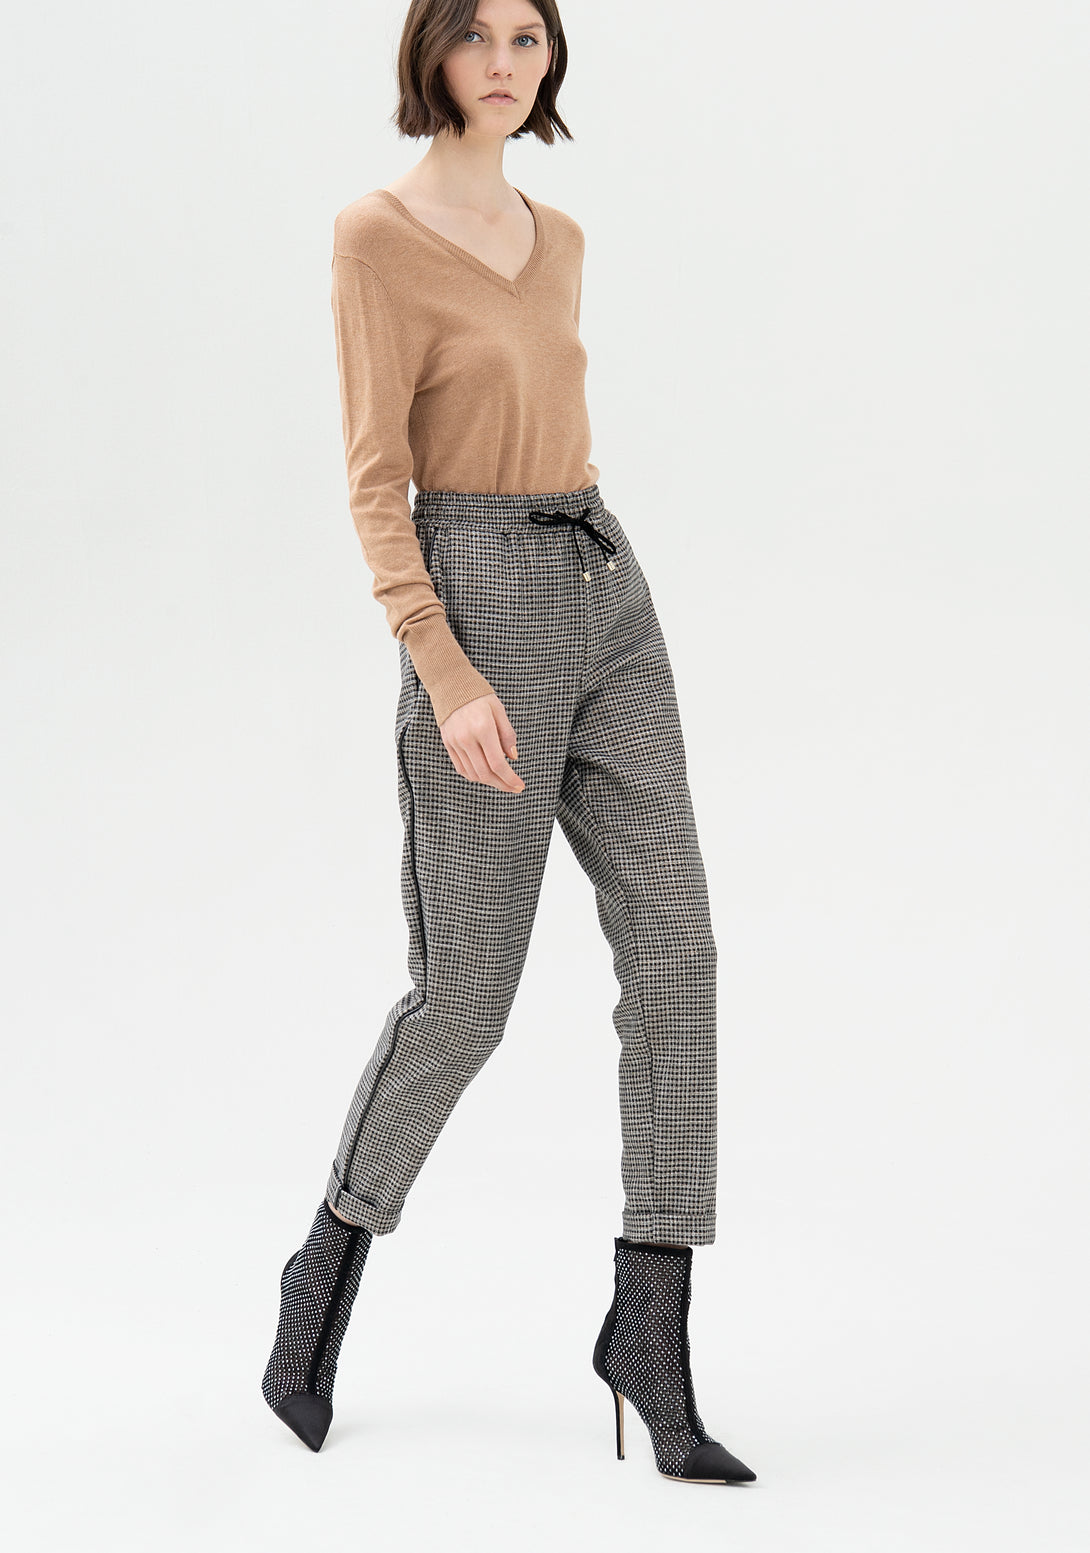 Jogger pant regular fit made in pied de poule fabric